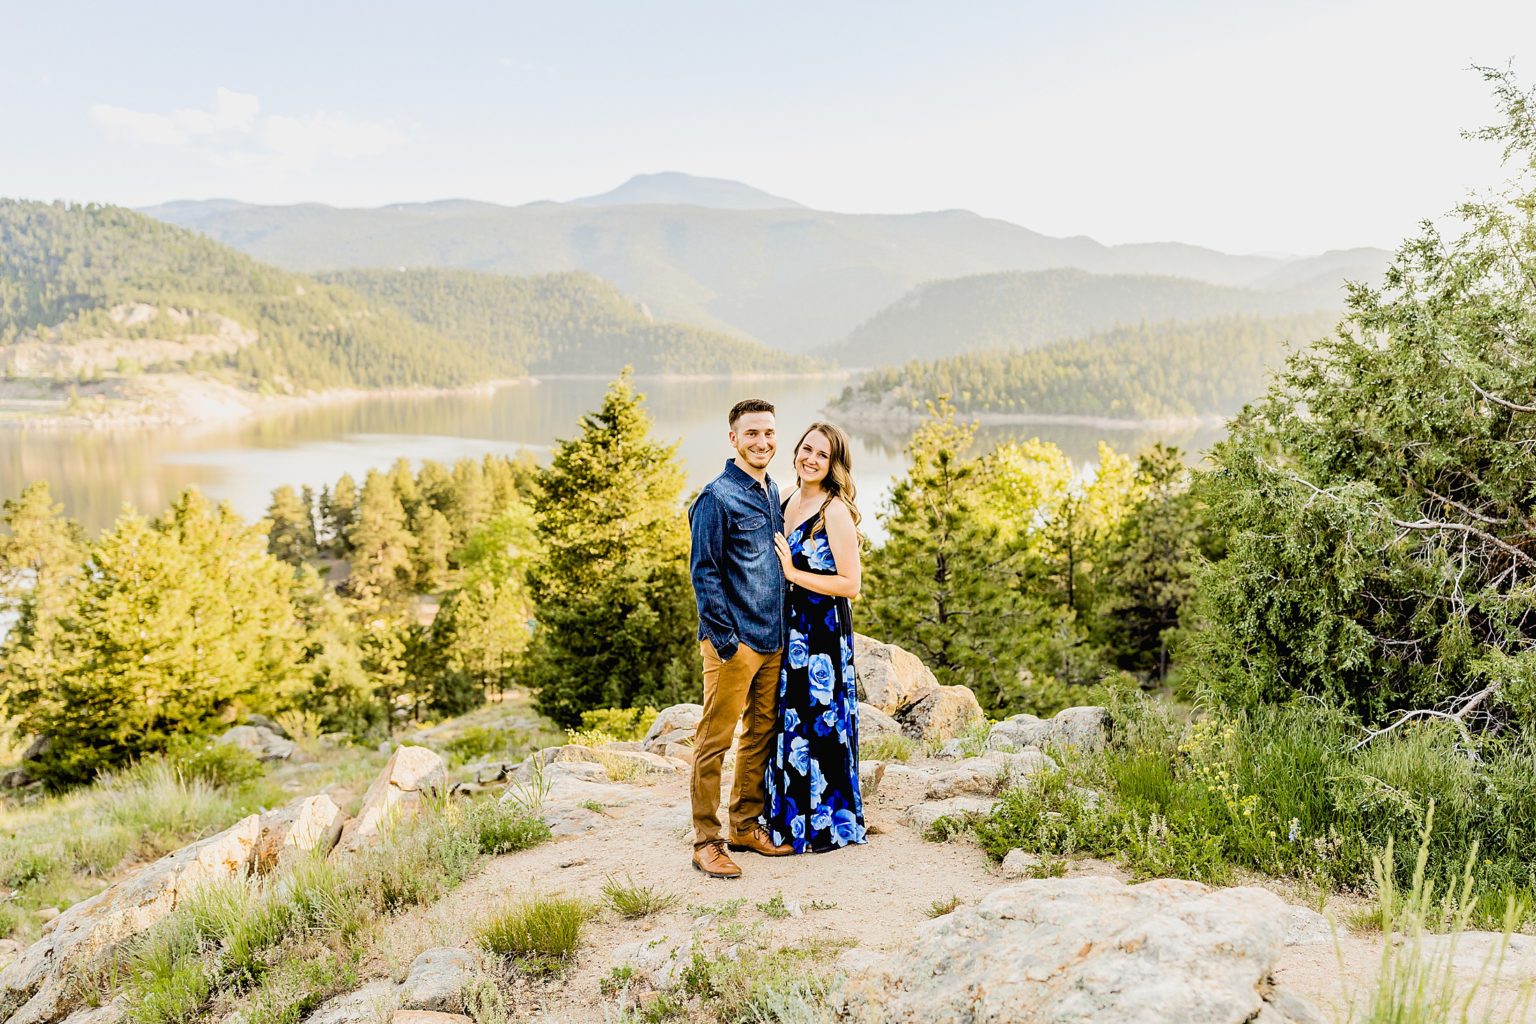 green mountain scenery and lake background with a couple celebrating wedding anniversary